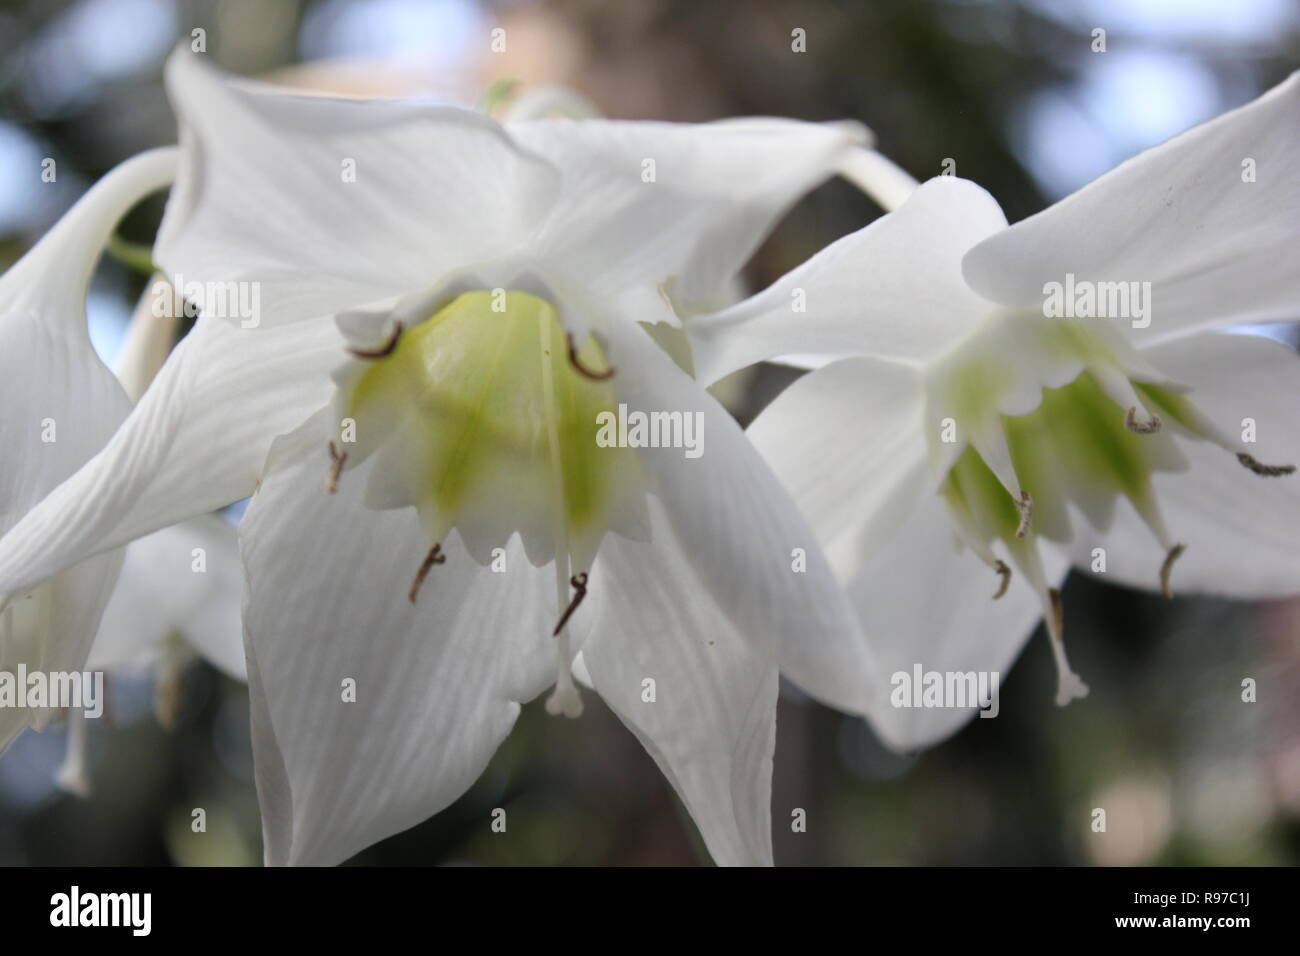 Eucharis amazonica, Amazon Lily, beautiful white flowers growing in the quiet meadow. Stock Photo